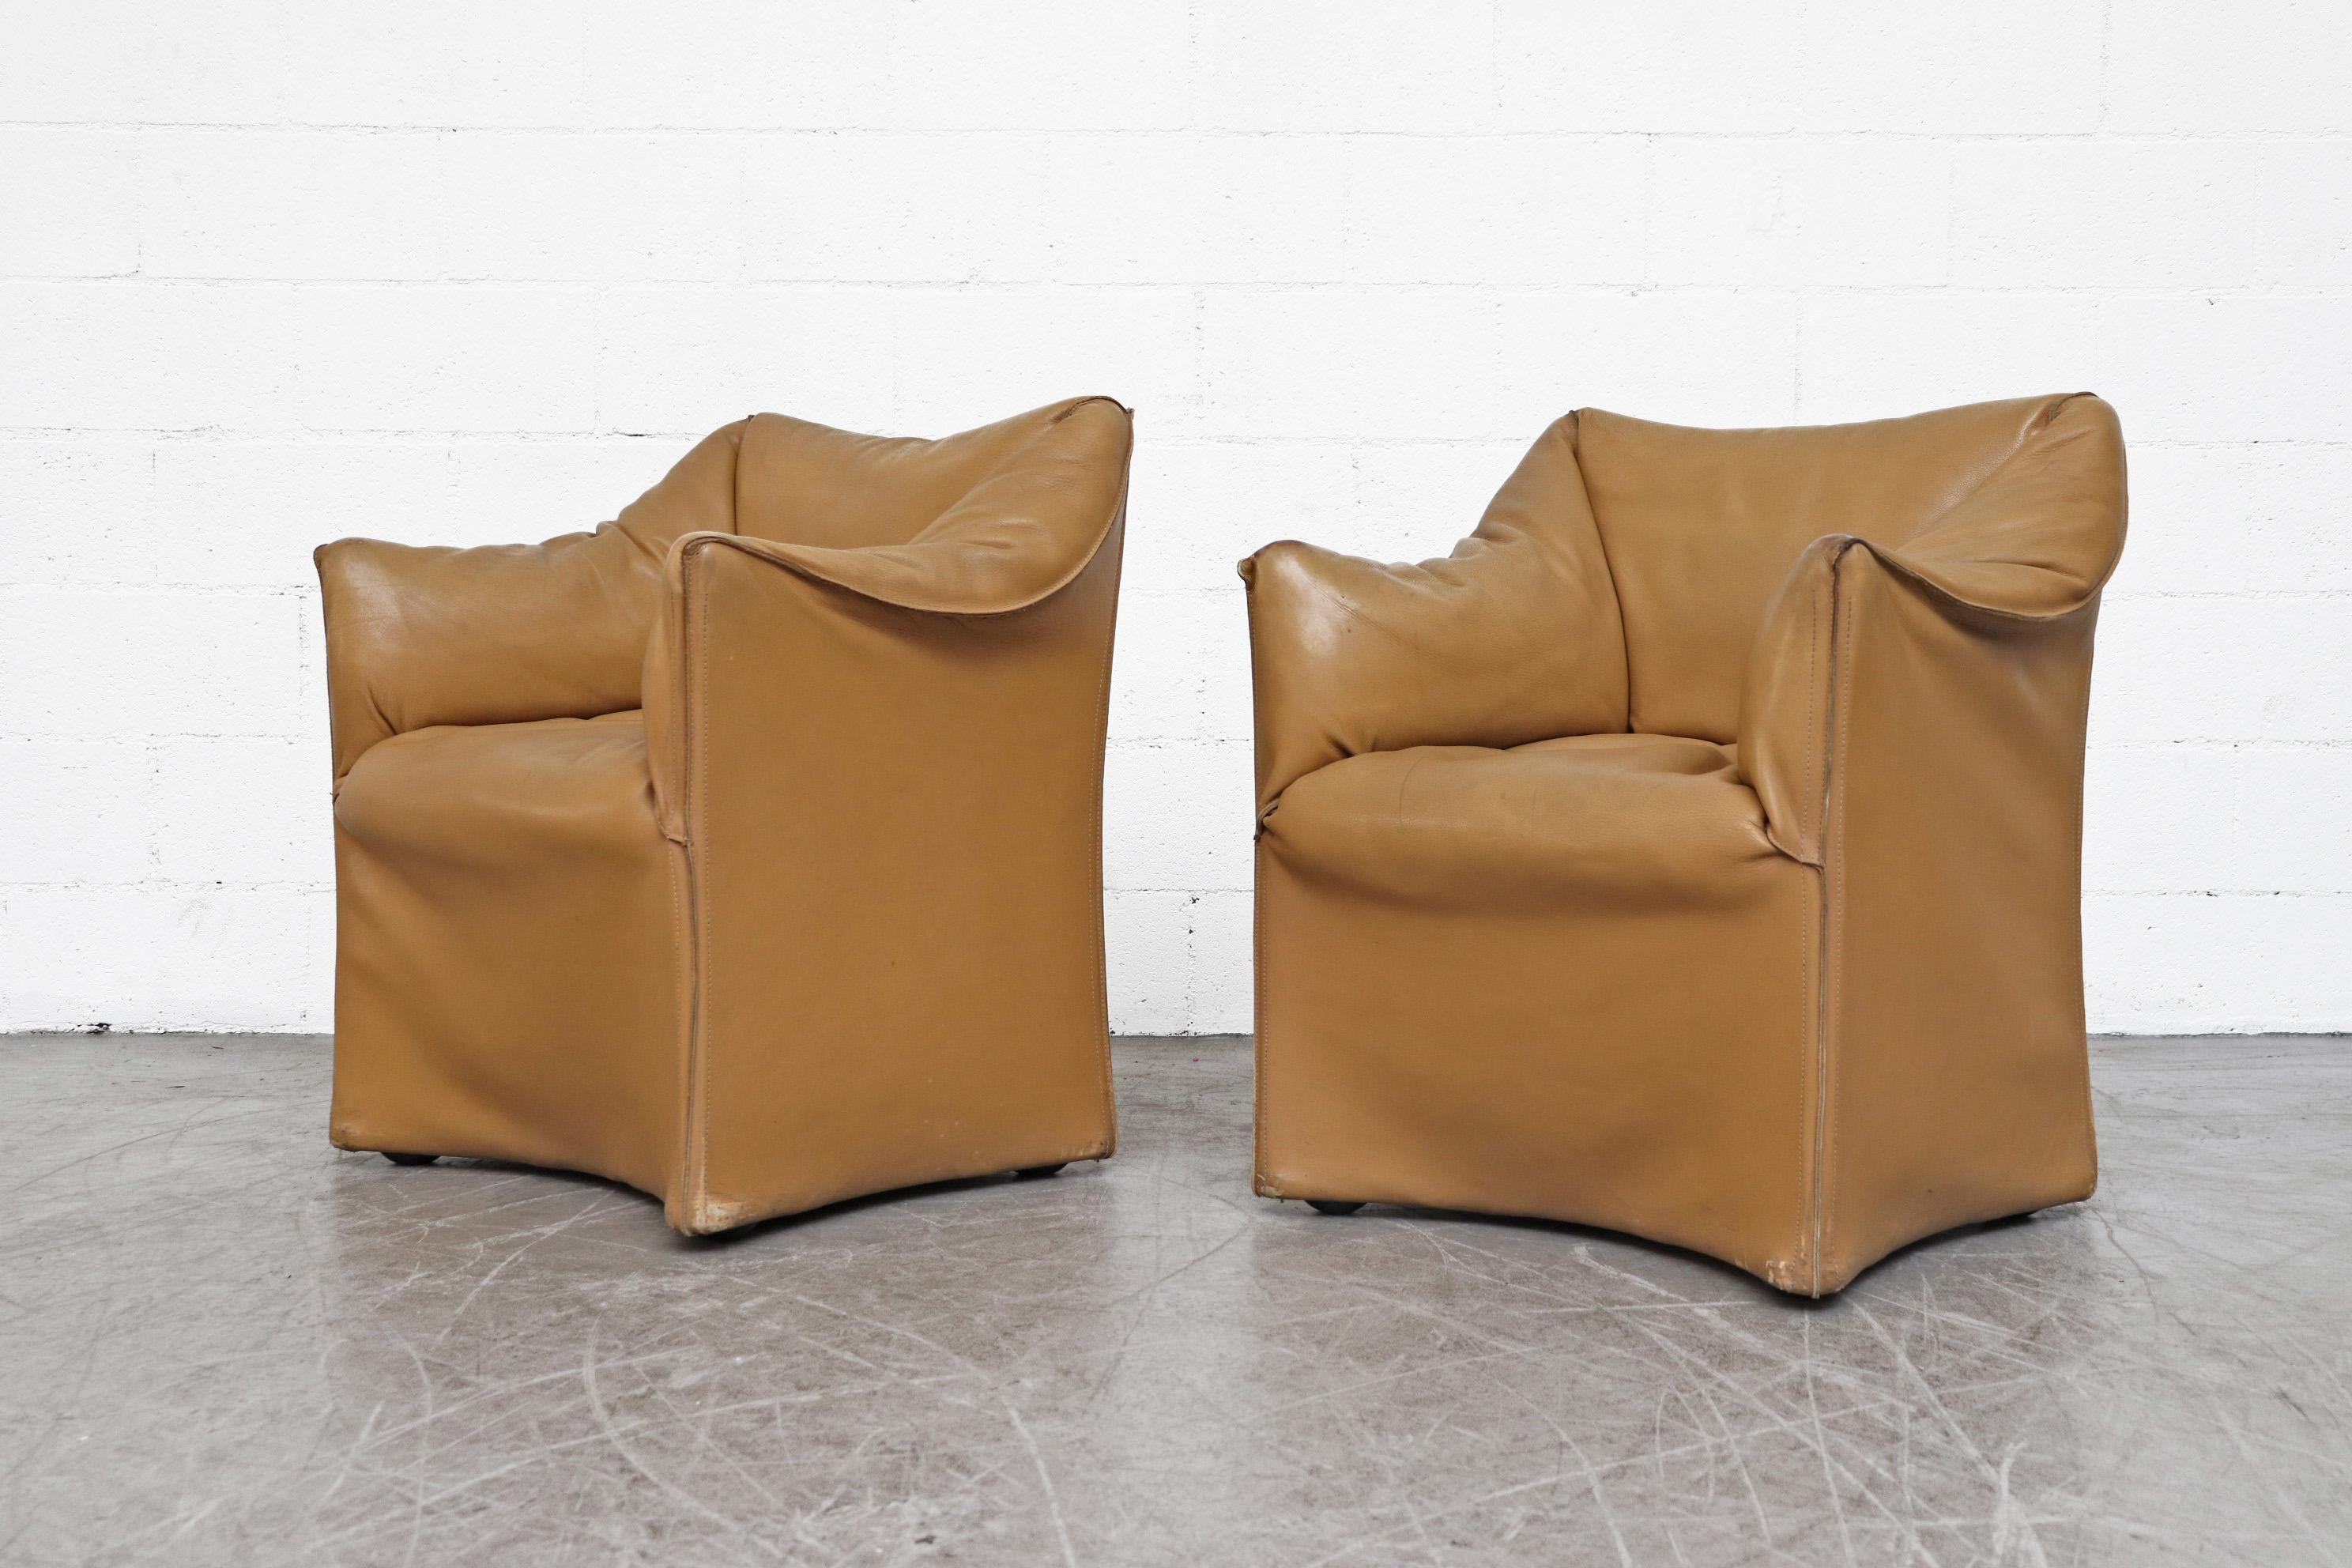 Pair of Mario Bellini Caramel leather armchairs. Distinctive wing style armrests. In very original and worn condition with visible wear and patina. Well loved, set price.